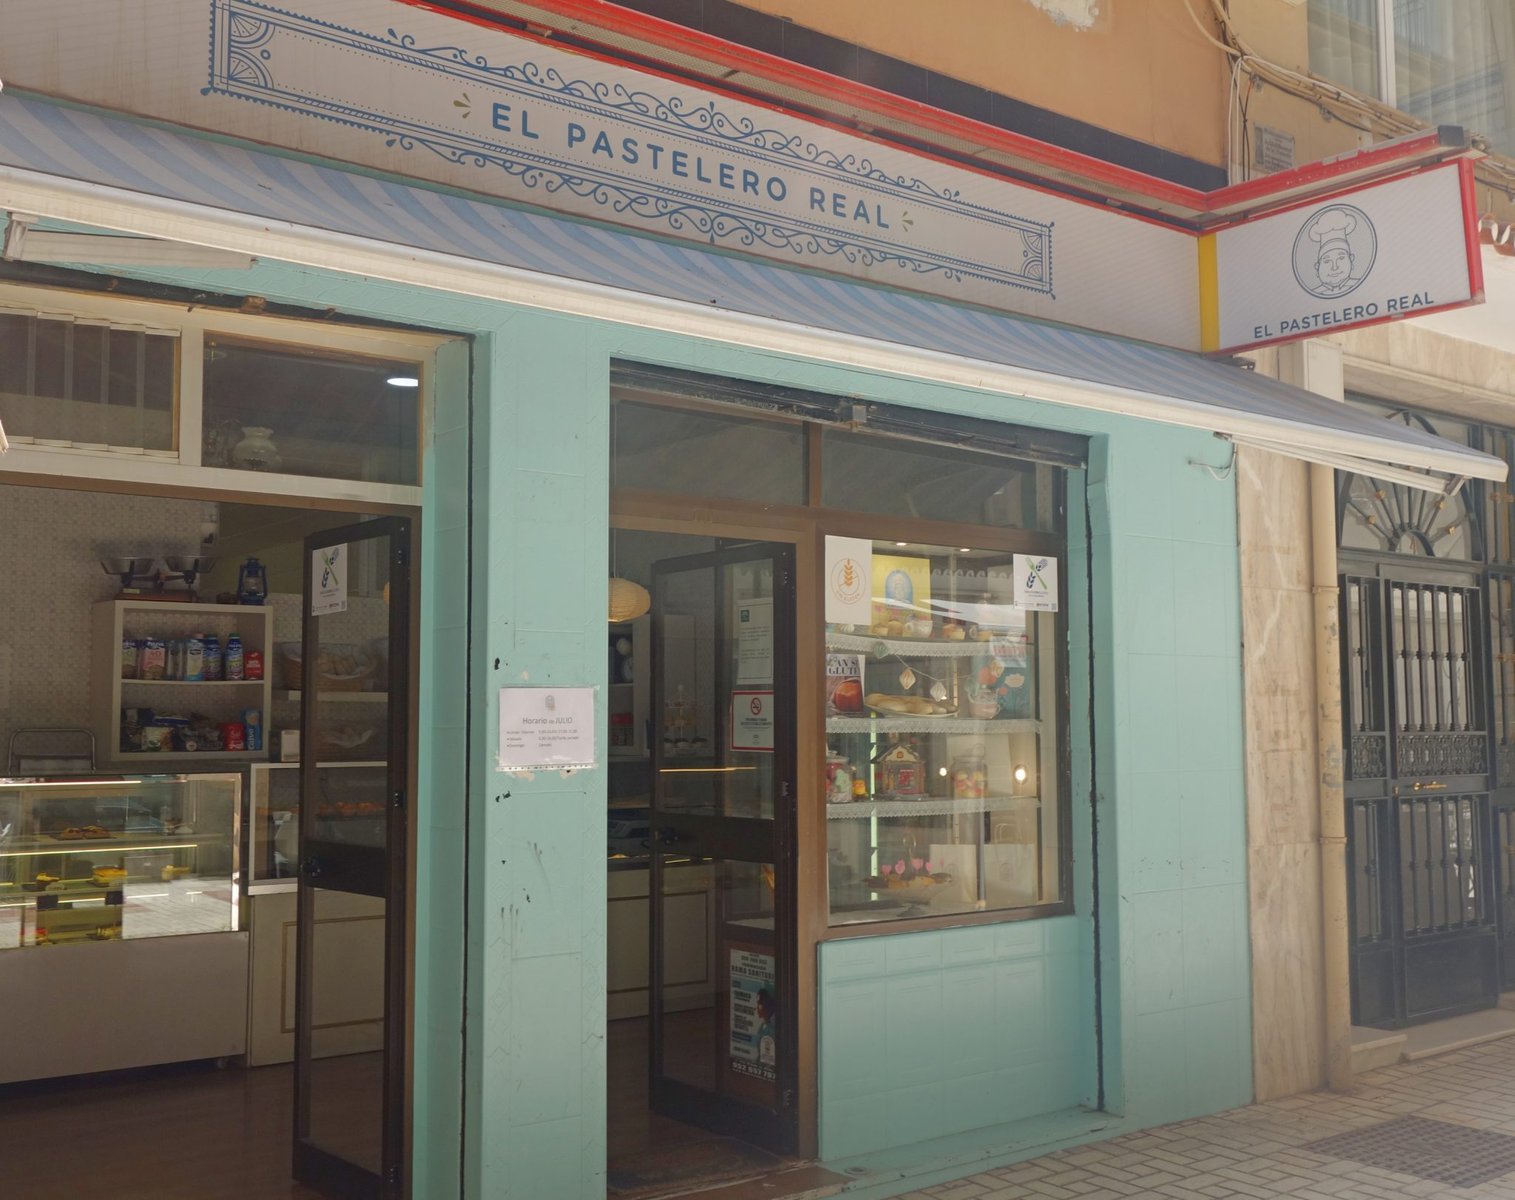 Find a Gluten-Free Bakery in Malaga Near You-Four Options